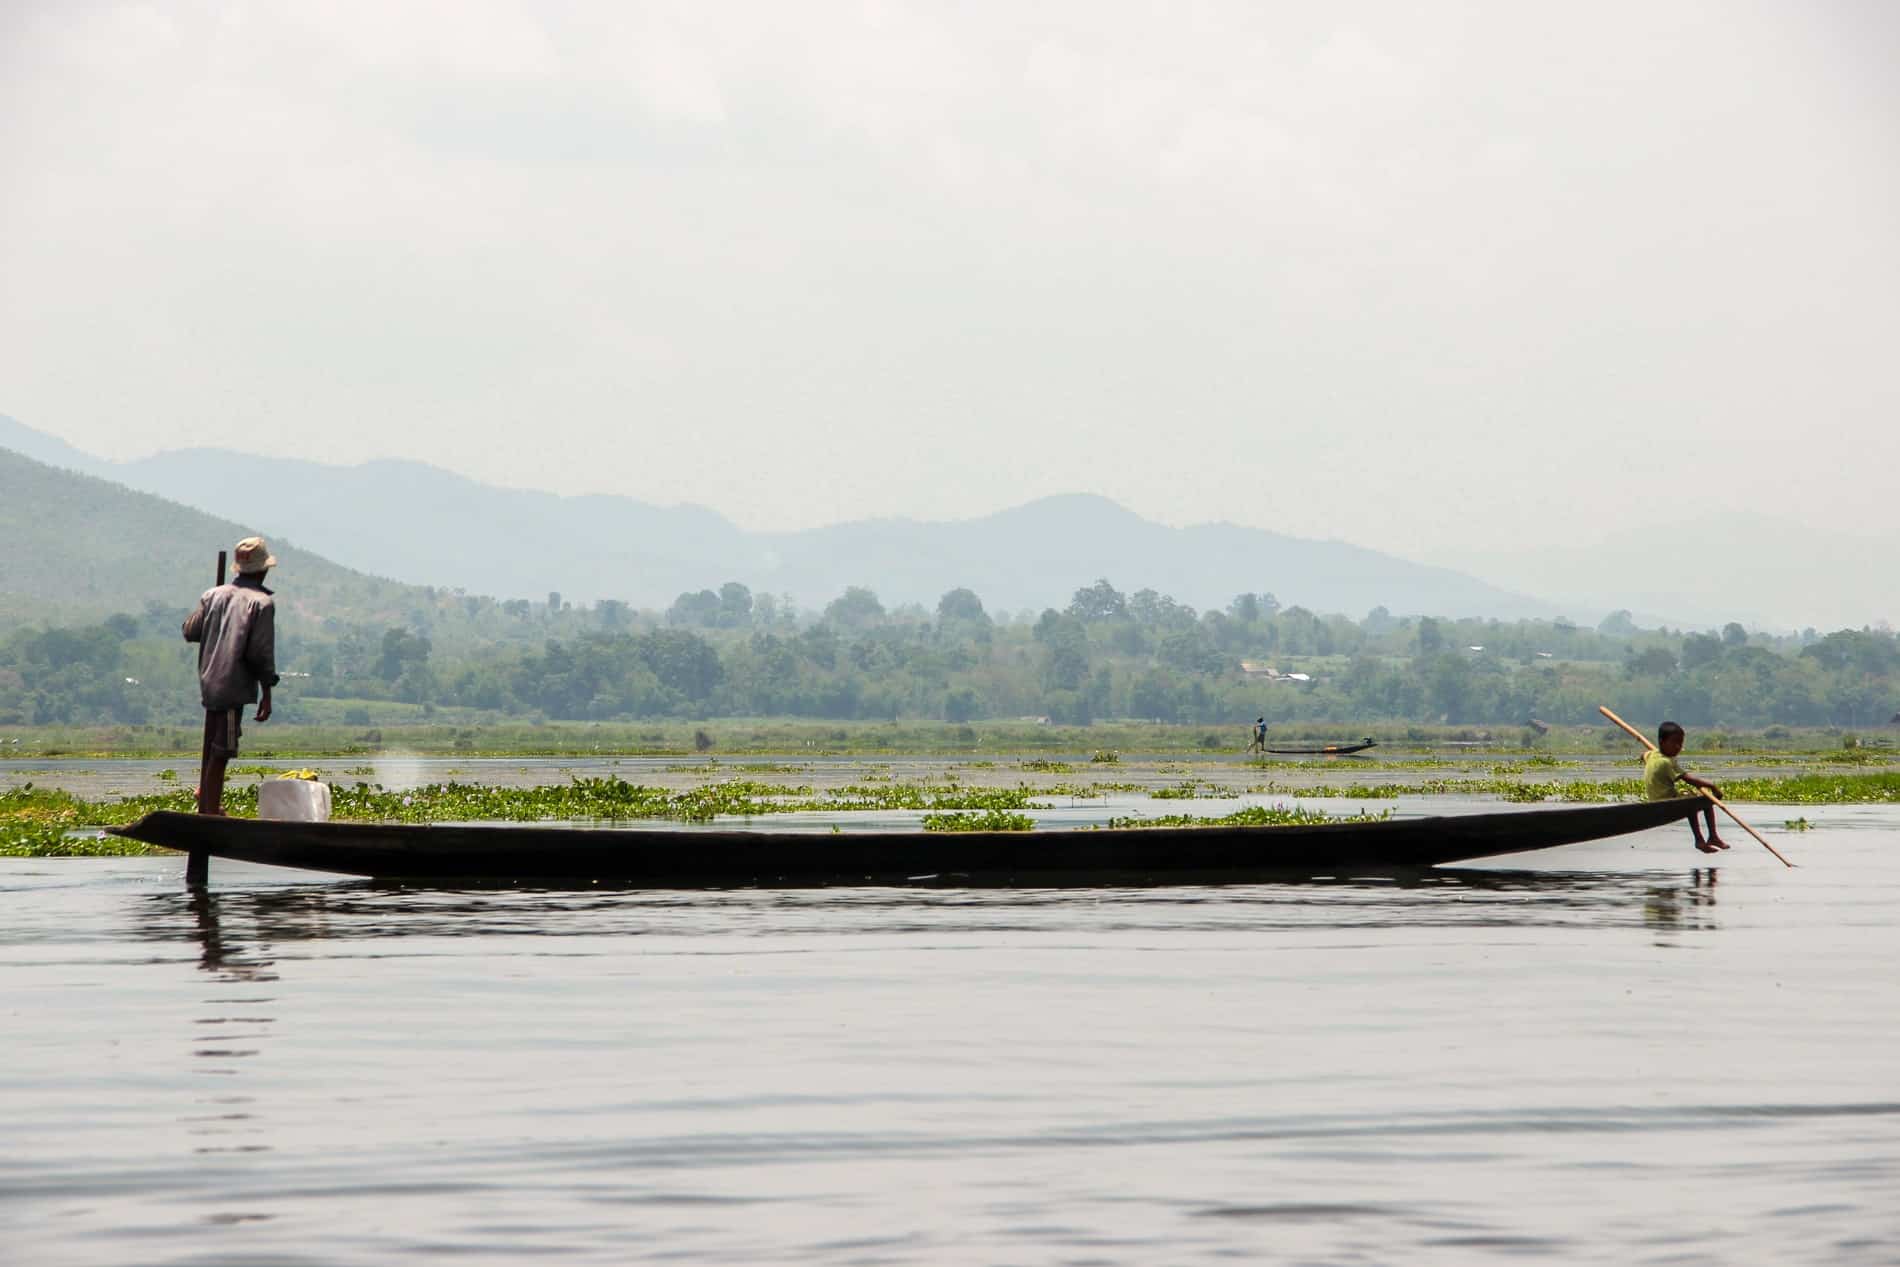 A standing man and a sitting young boy on the ends of a long wooden boat on the calm water of Inle Lake. 